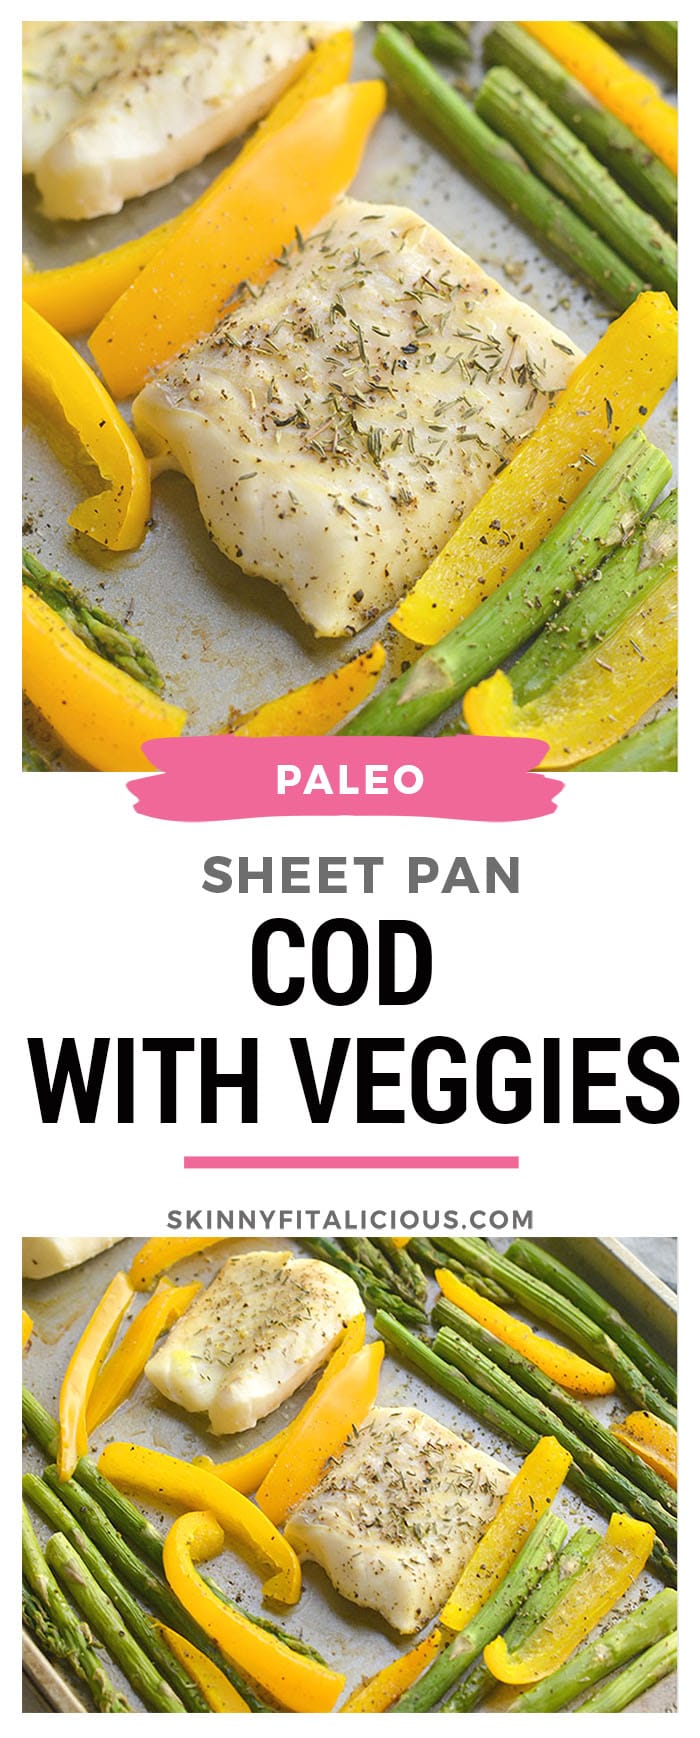 Sheet Pan Cod with Veggies! Baked cod with garlic & herbs with roasted veggies. A light, easy, Paleo meal that takes less than 30 minutes to make & prep. Baked cod never was so easy or so good! Gluten Free + Low Calorie + Paleo + Whole30